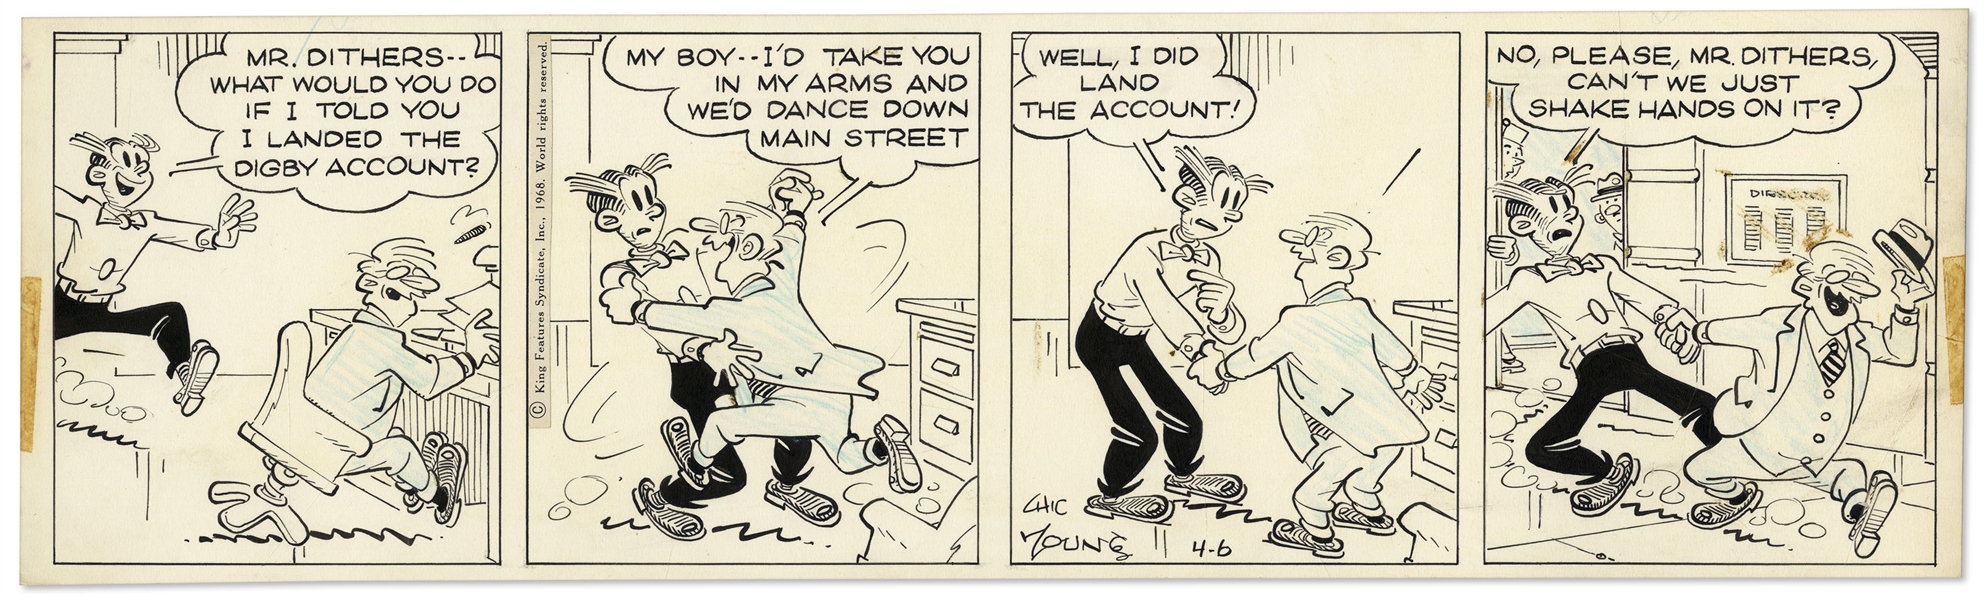 2 Chic Young Hand-Drawn ''Blondie'' Comic Strips From 1968 -- With Chic Young's Original Artwork for One